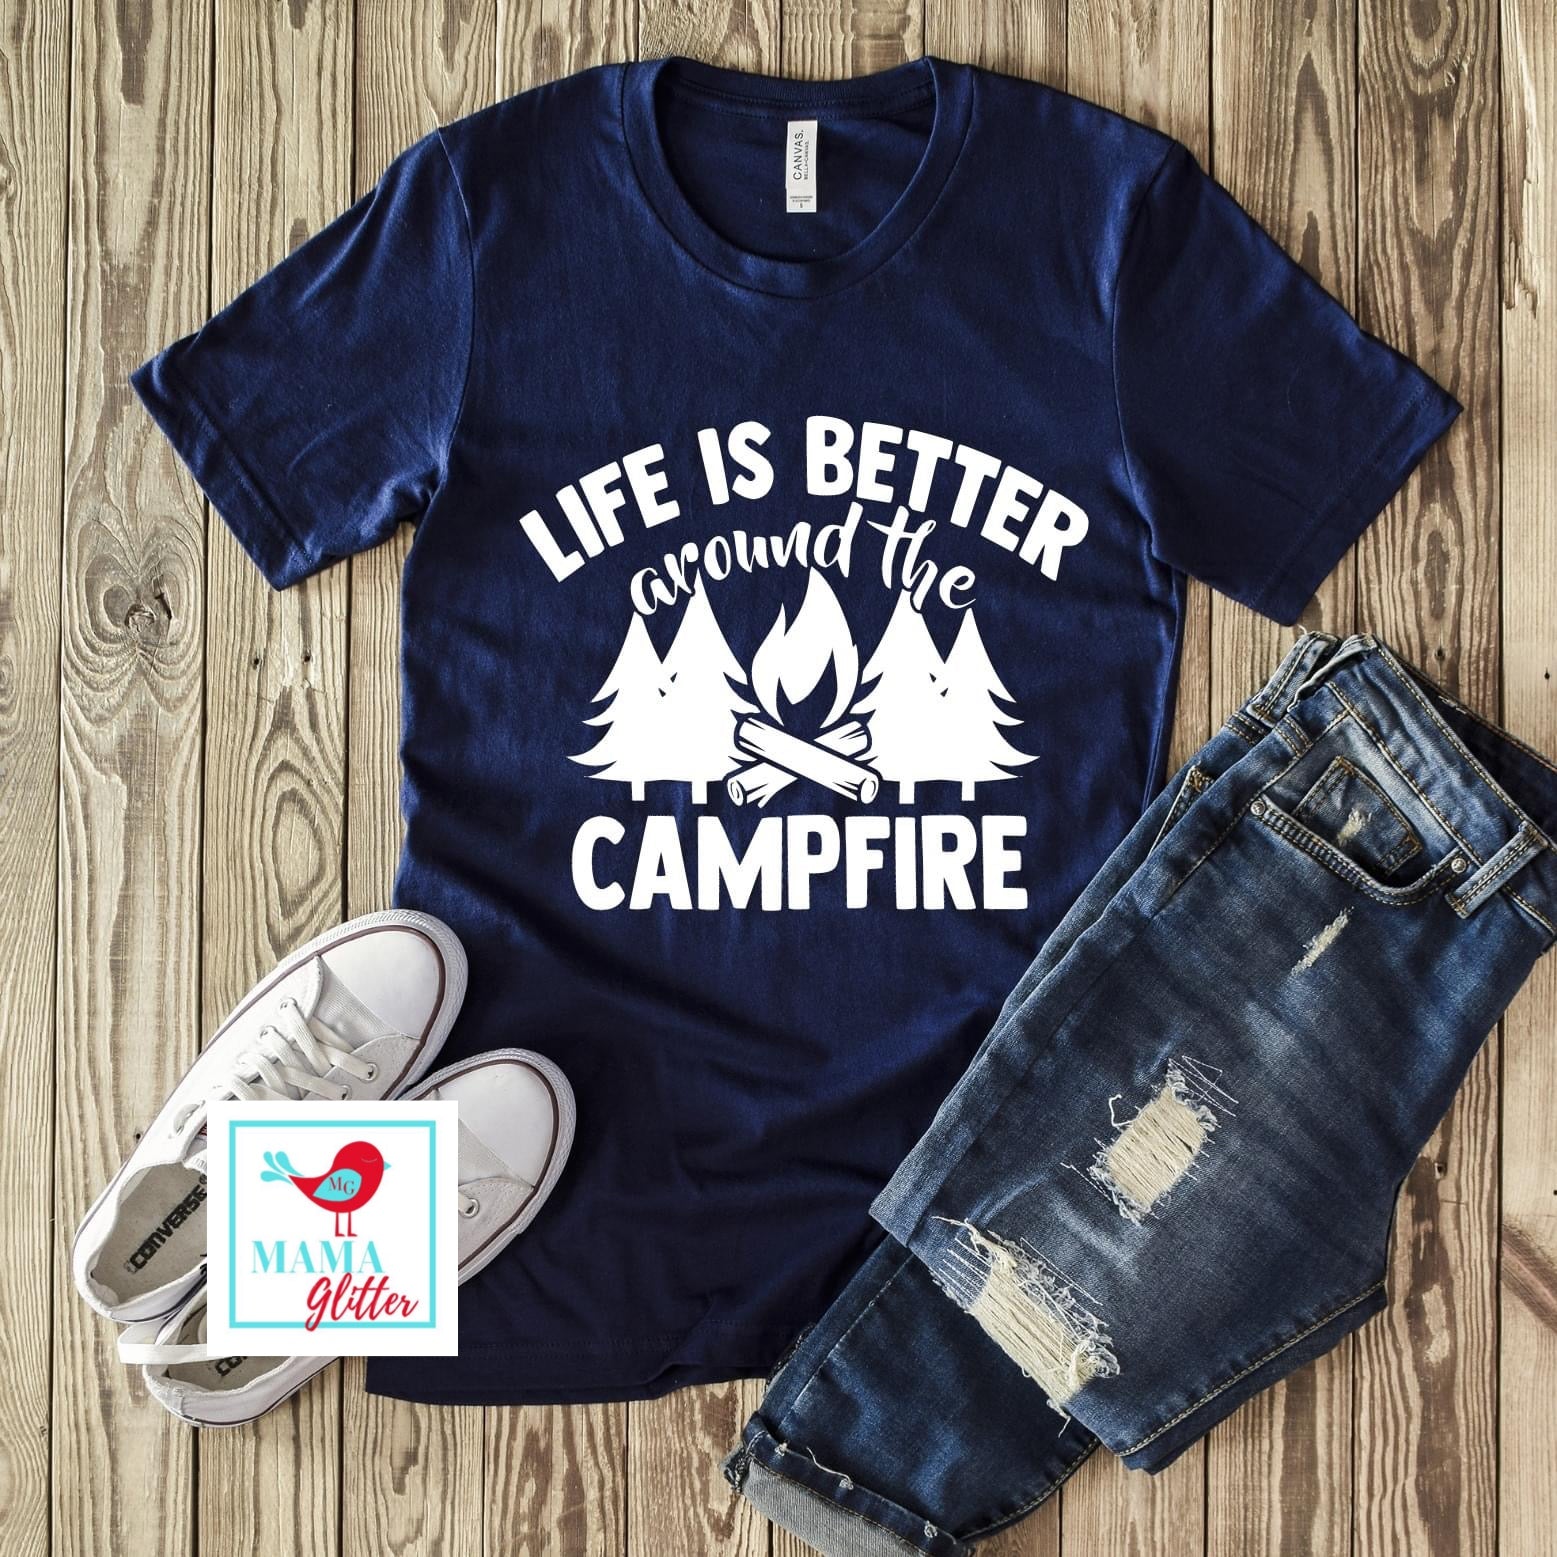 Life is Better Around the Campfire - White Print